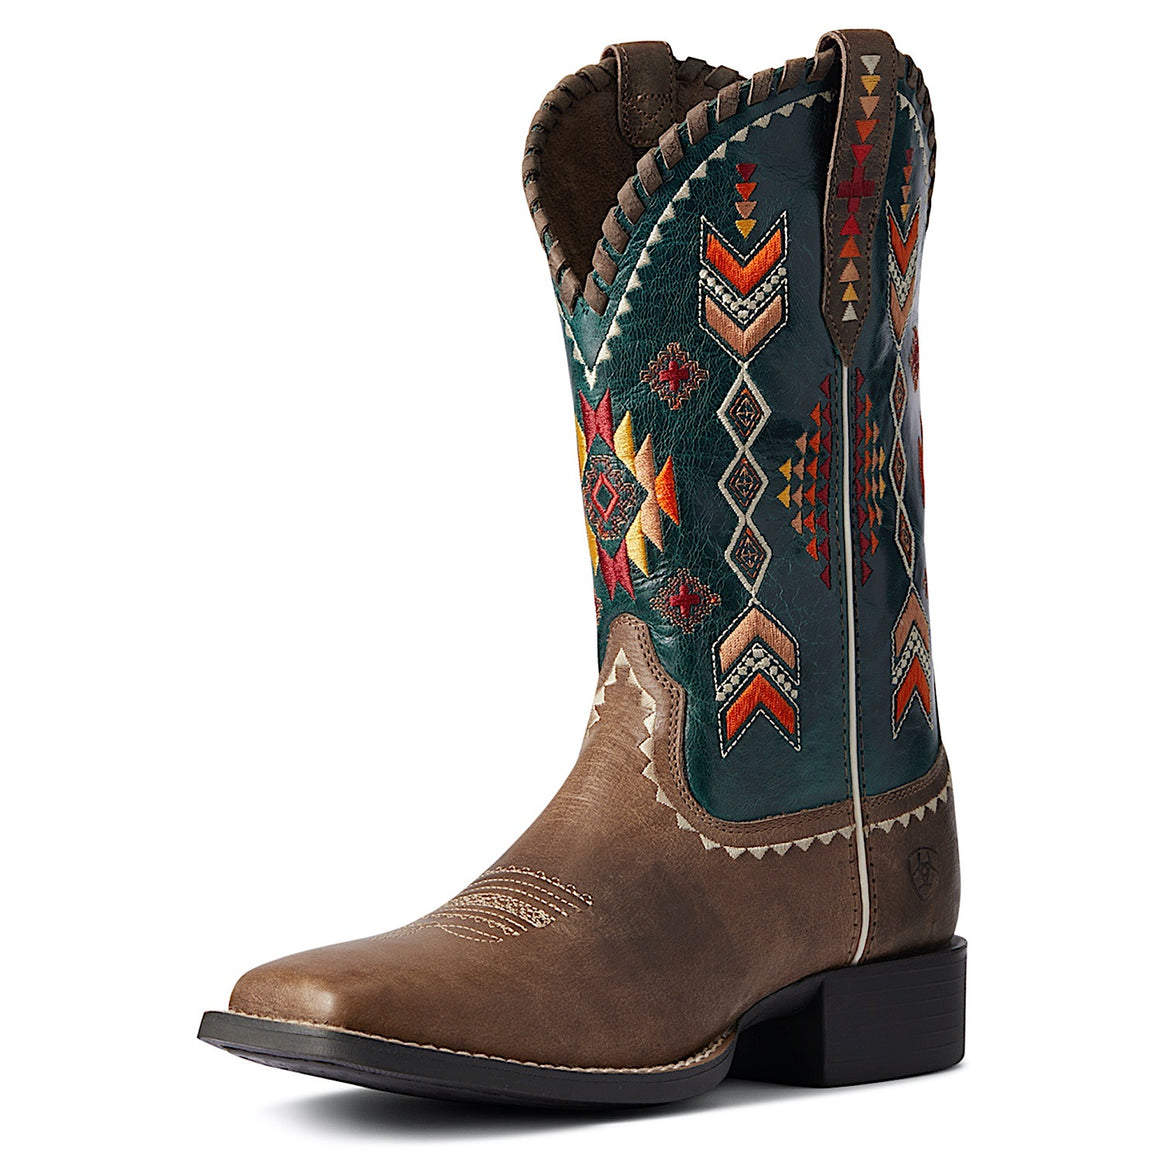 Buy Women's Ariat Western Boots | Heritage Roper & More Styles - The ...